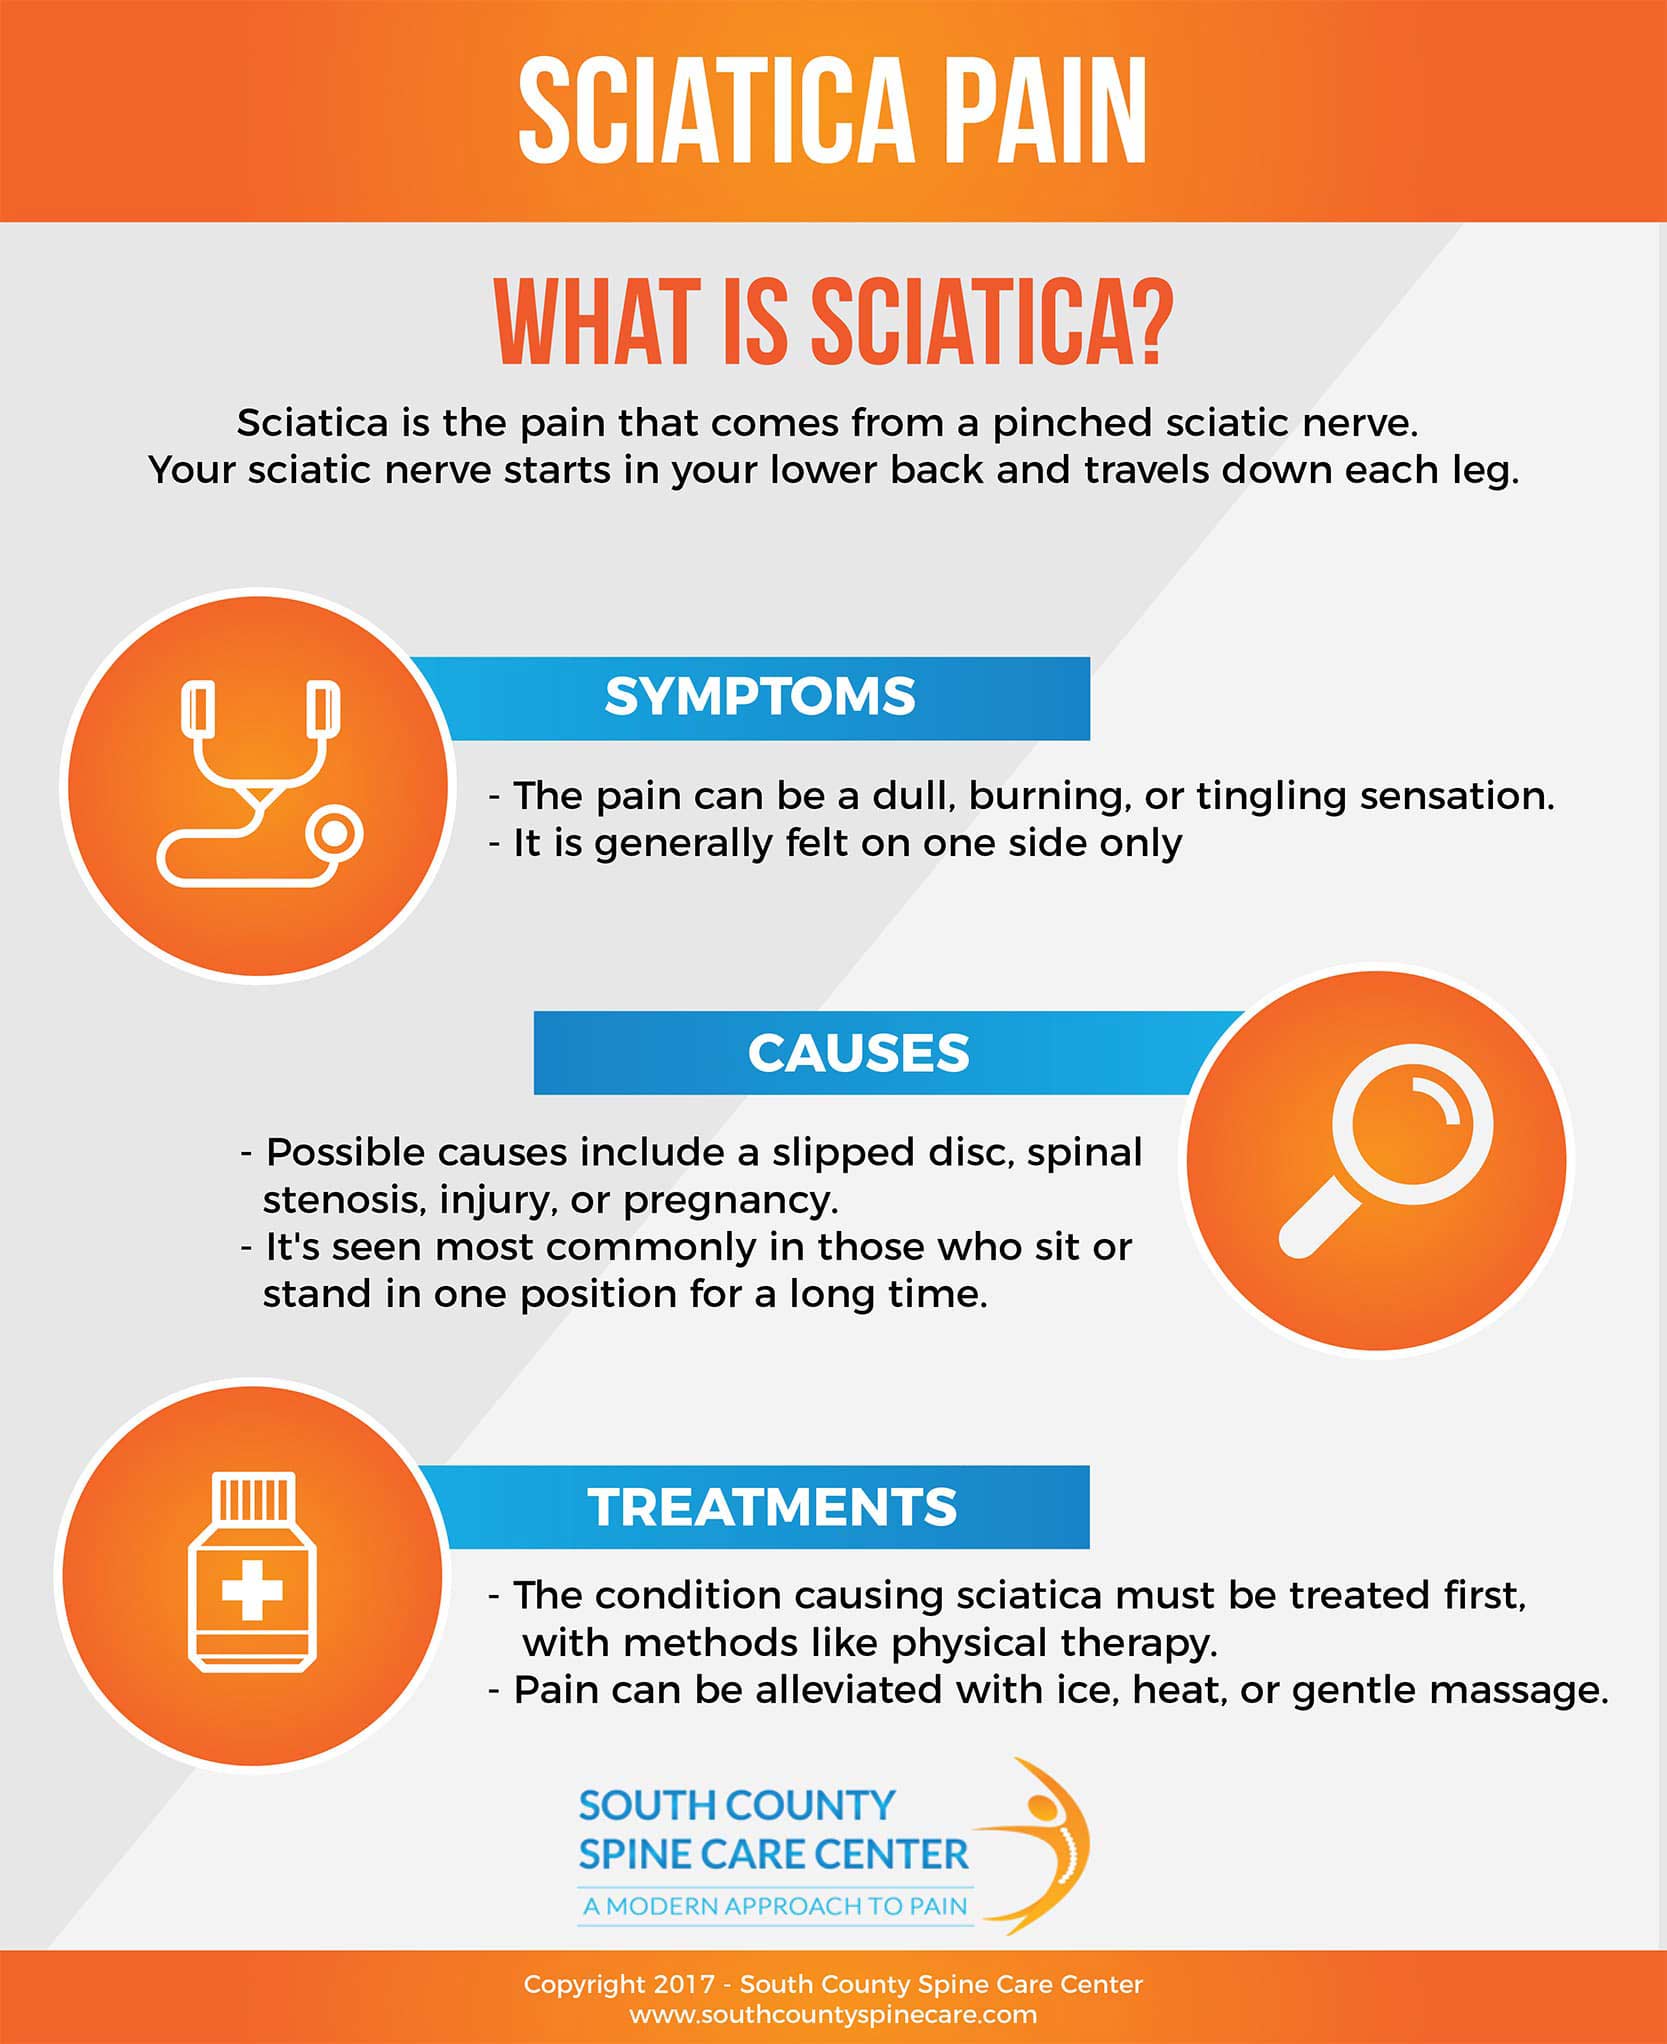 Sciatica Pain - South County Spine Care